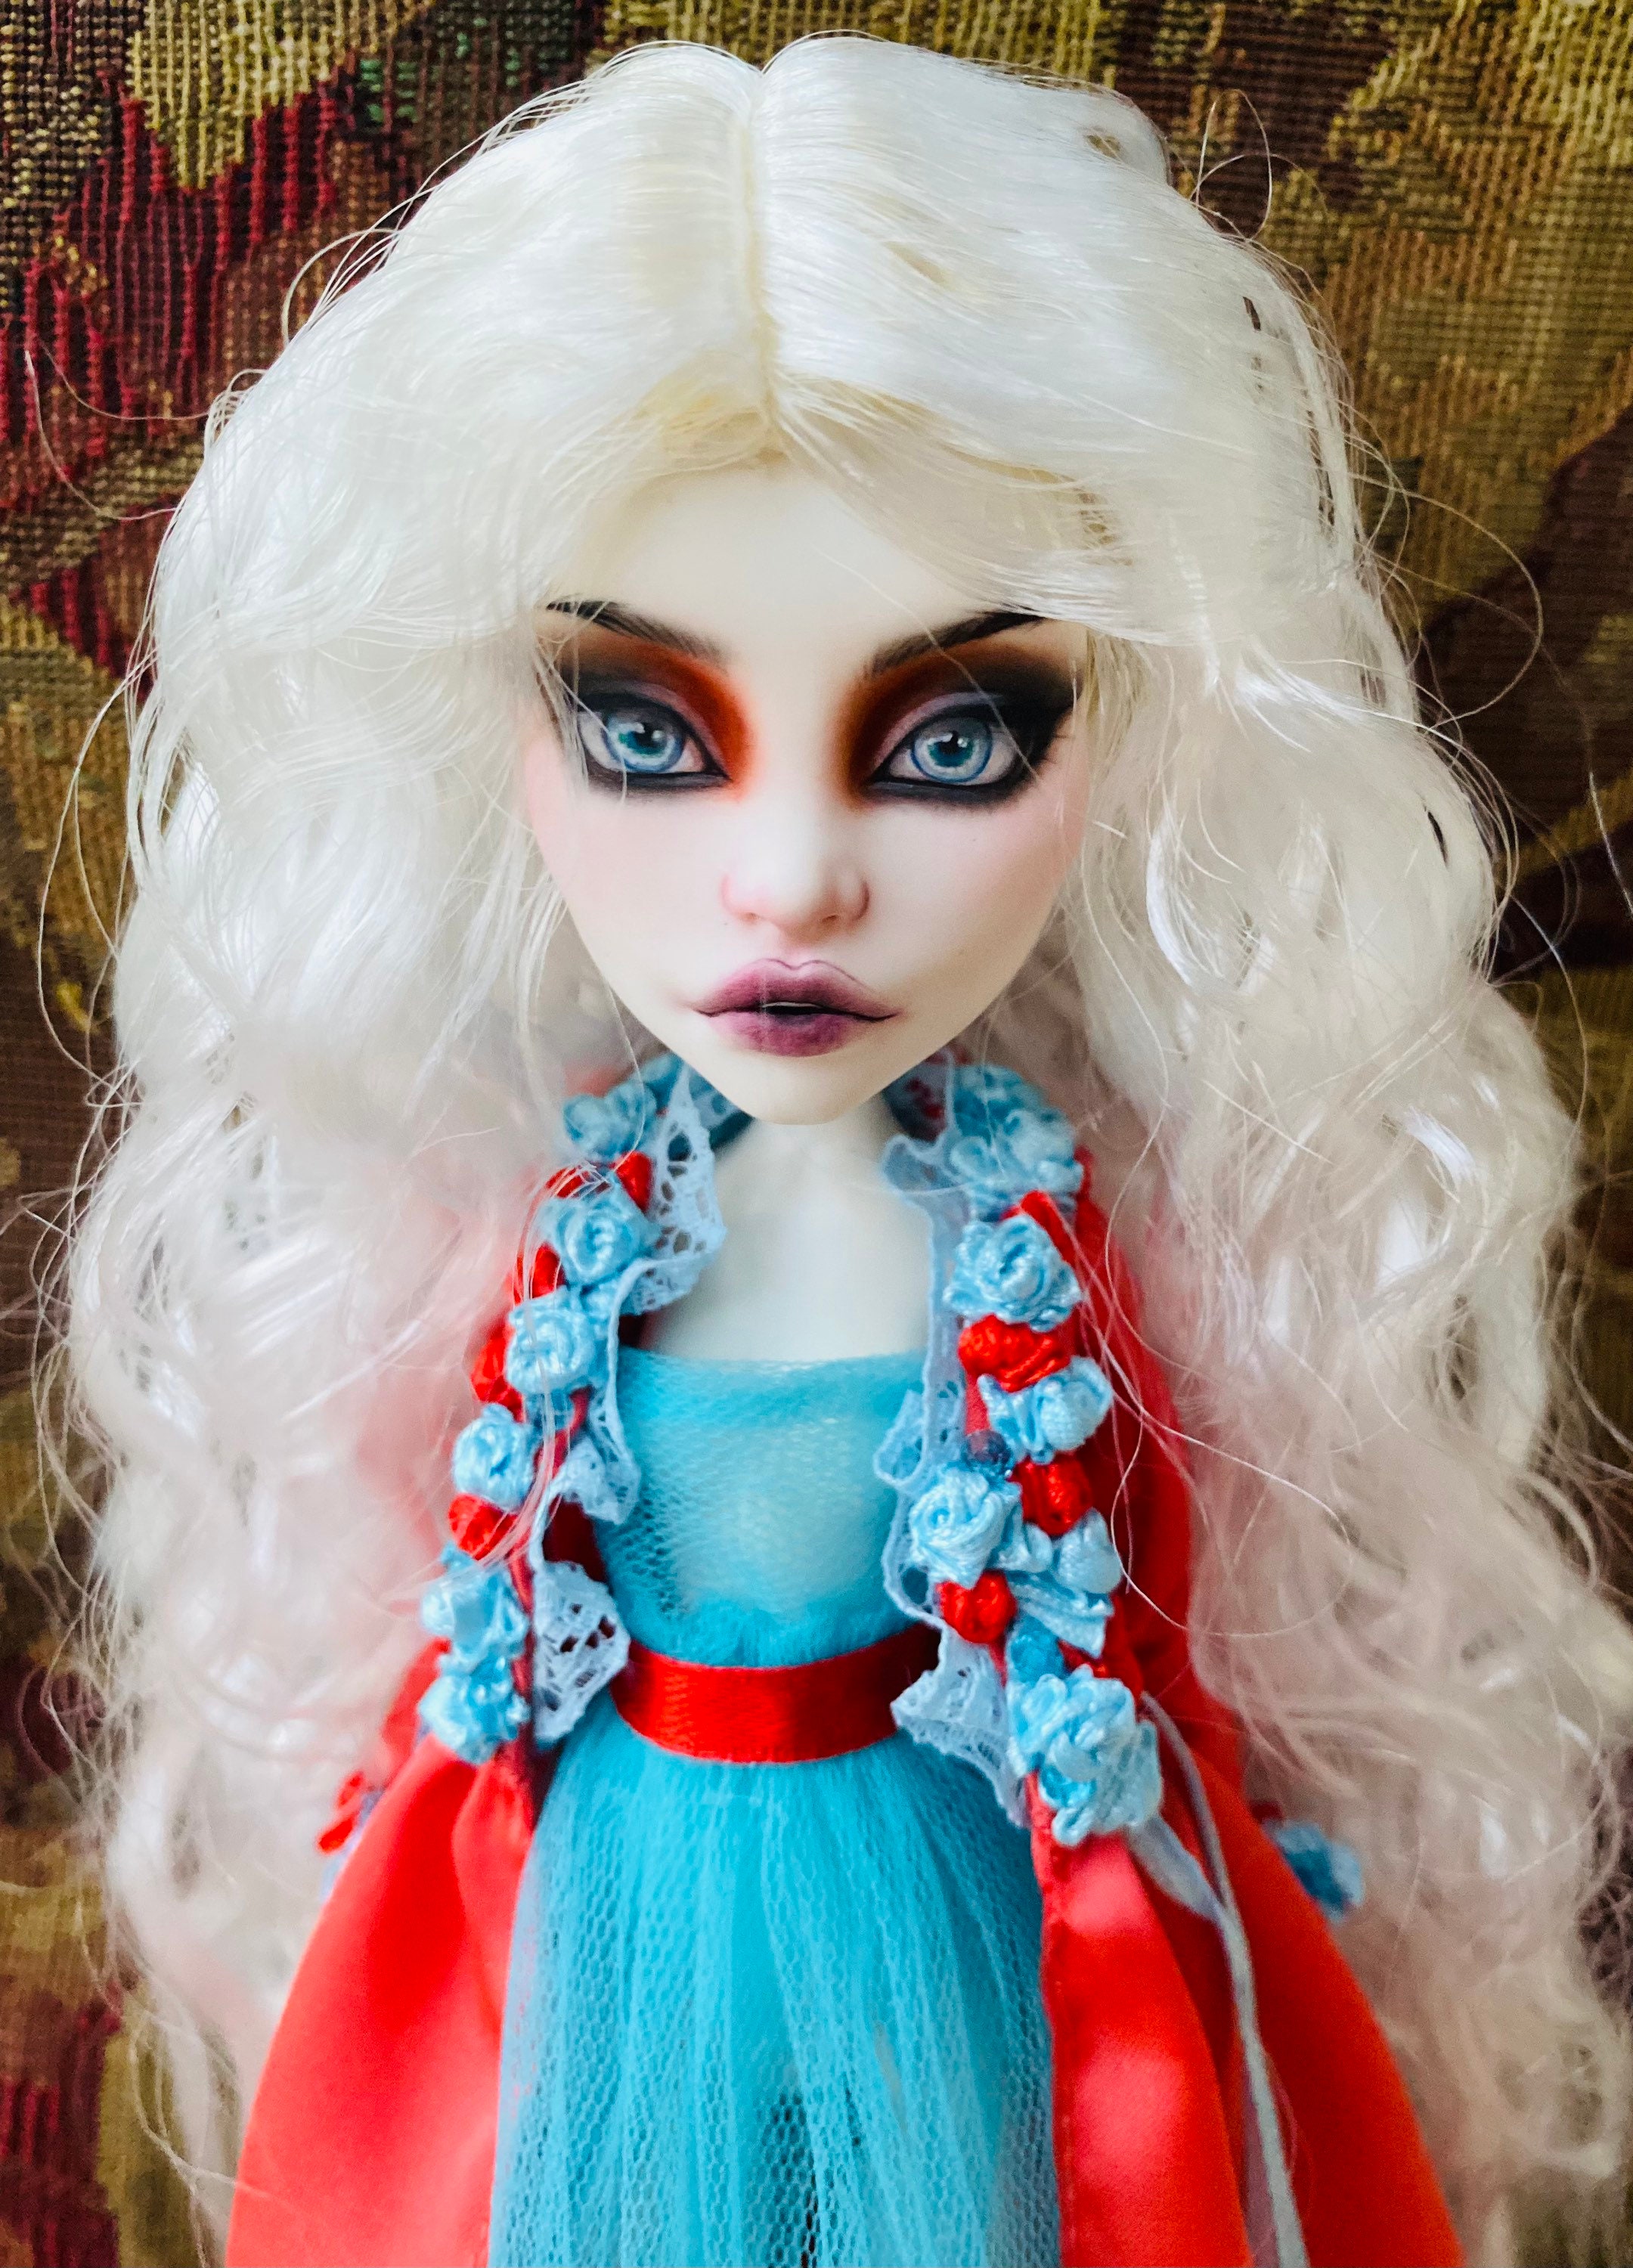 Where can I buy doll hair for rerooting?✨️ : r/MonsterHigh